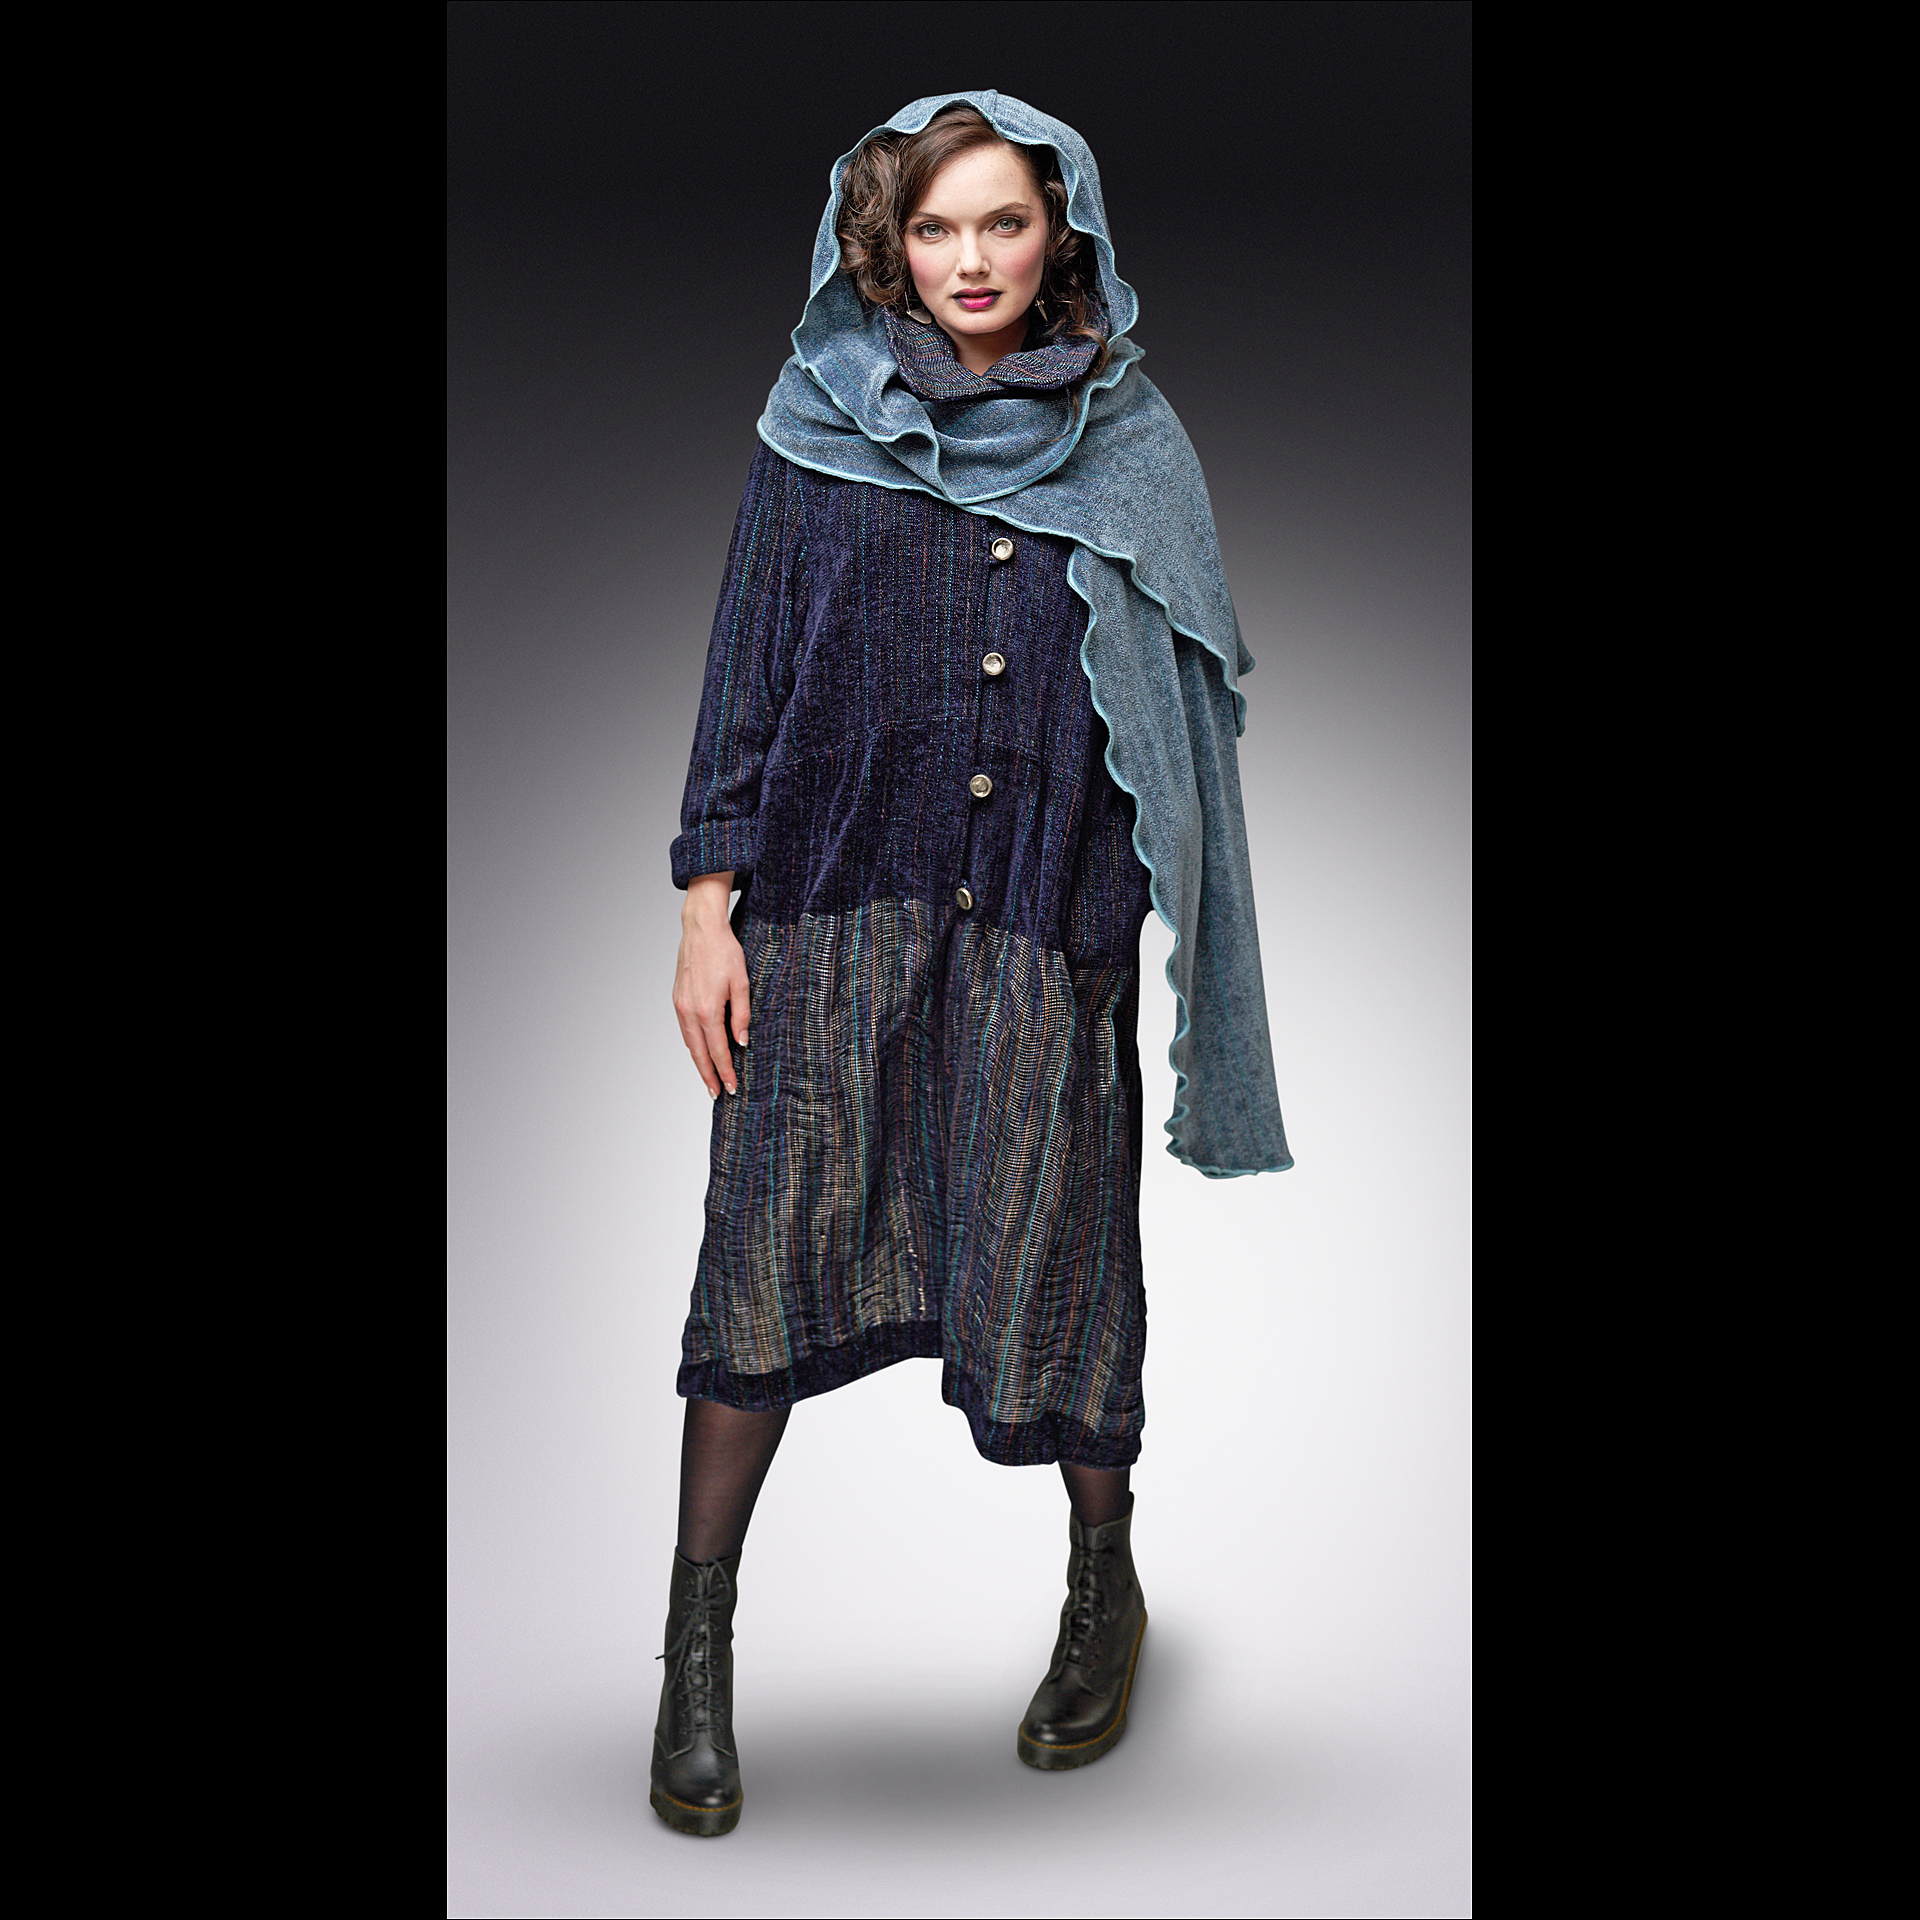 The Poet’s Coat shown with Hooded Shawl